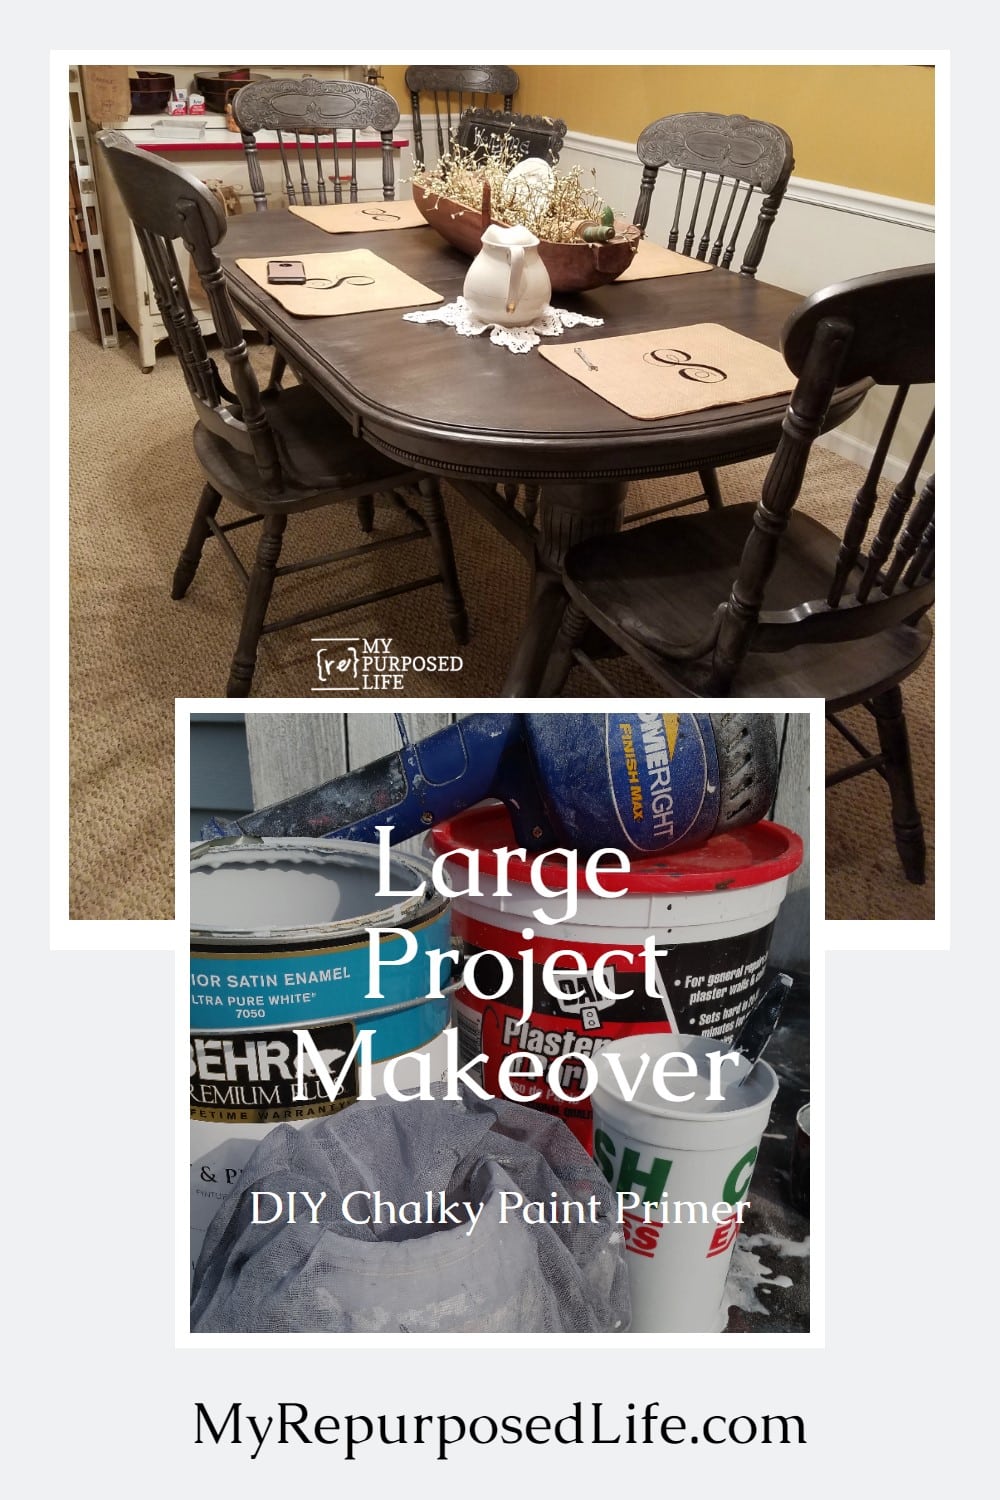 A very large furniture project may seem daunting, but taking it one step at a time will get it done. Using a DIY chalky paint primer will save you money. via @repurposedlife